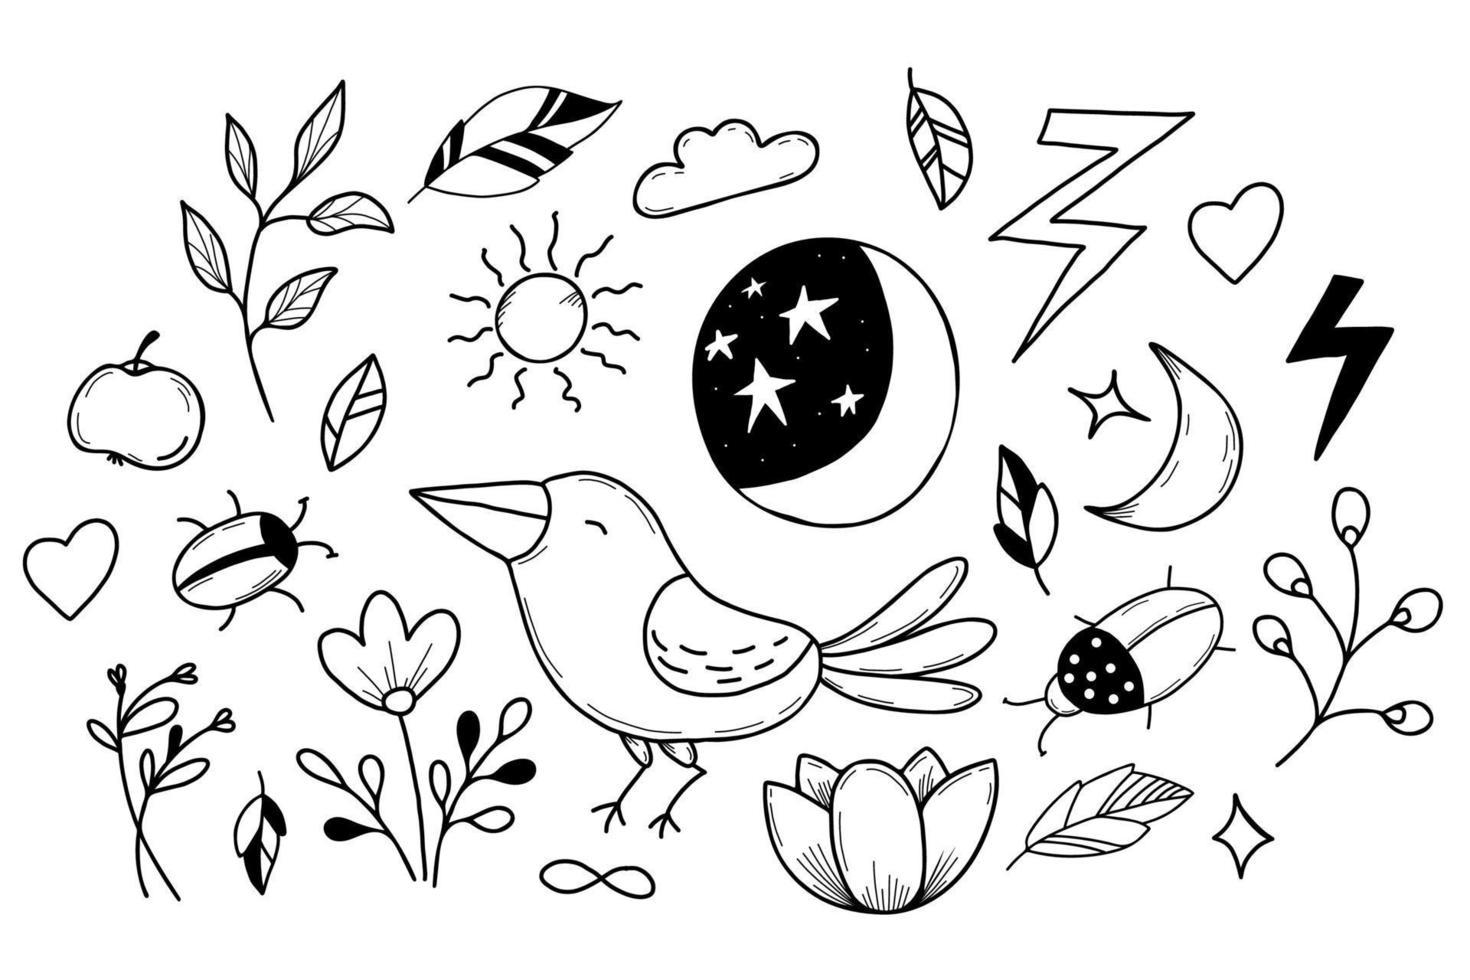 Set of magic signs, beetle and crow, flower and moon with starry sky in handmade linear doodle style. Vector illustration. Isolated elements for design, decor, postcards and print